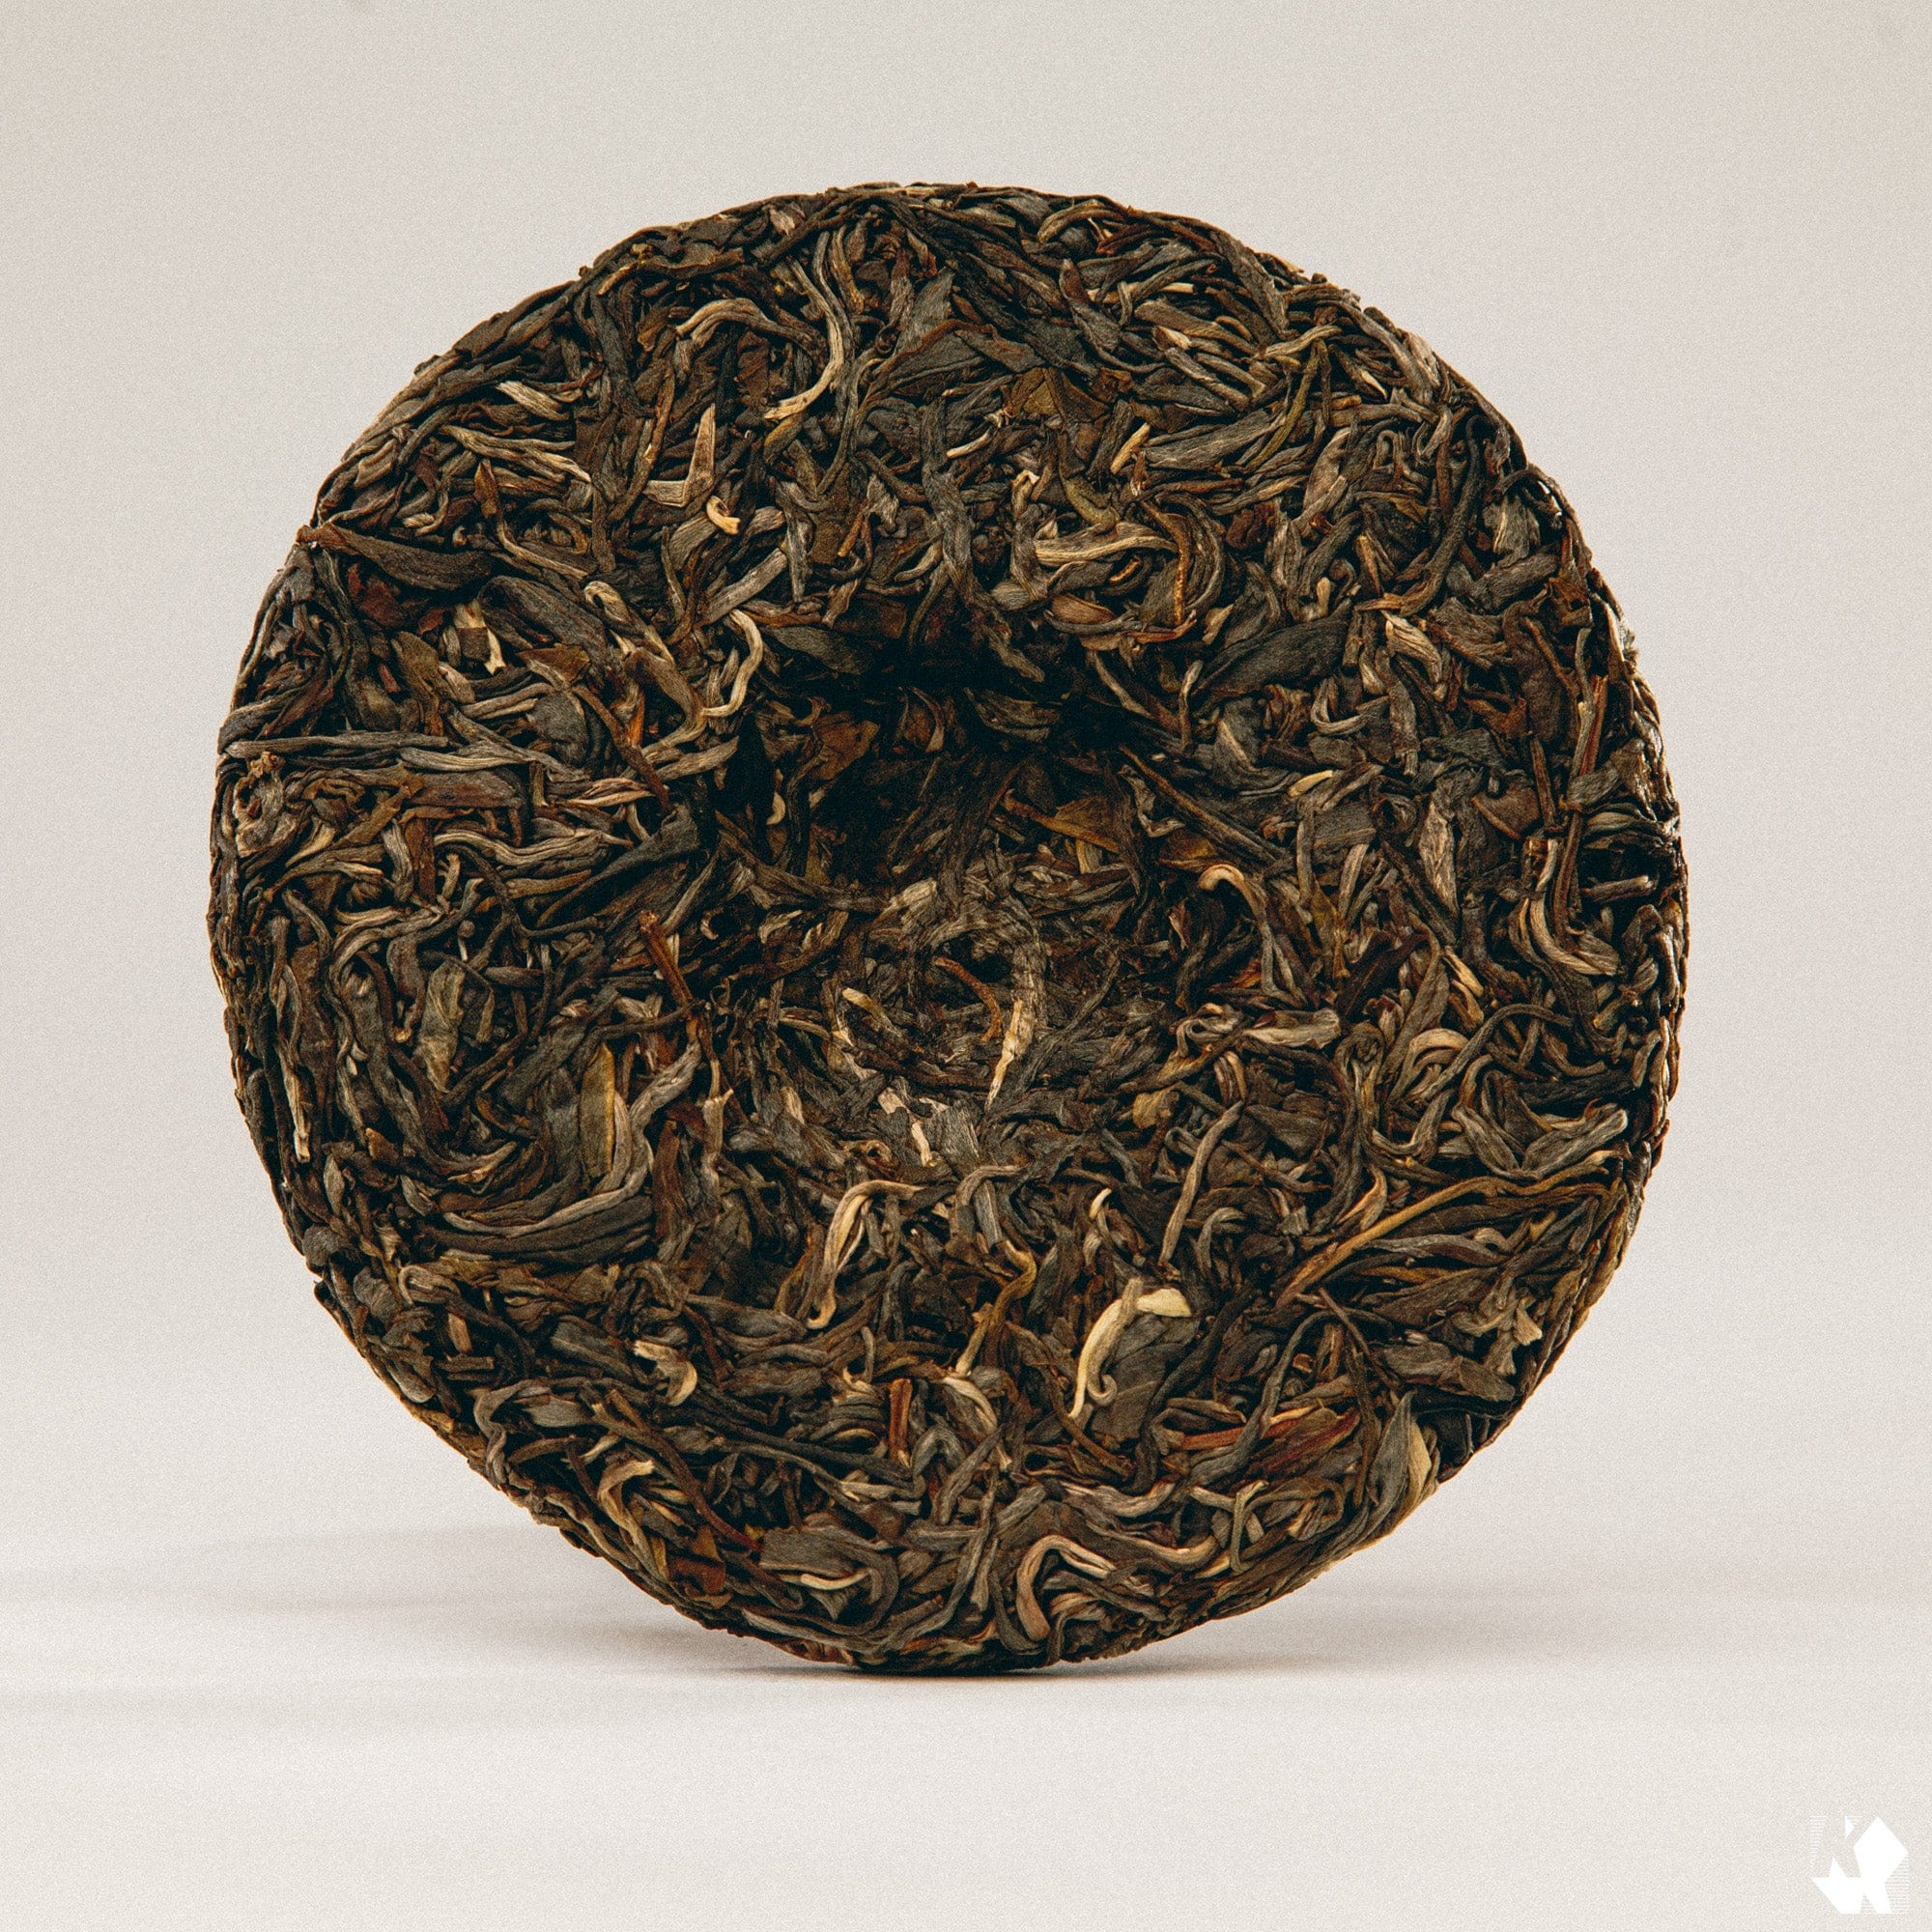 2022 'A Flash And Then The Quiet' Raw Pu-erh Tea